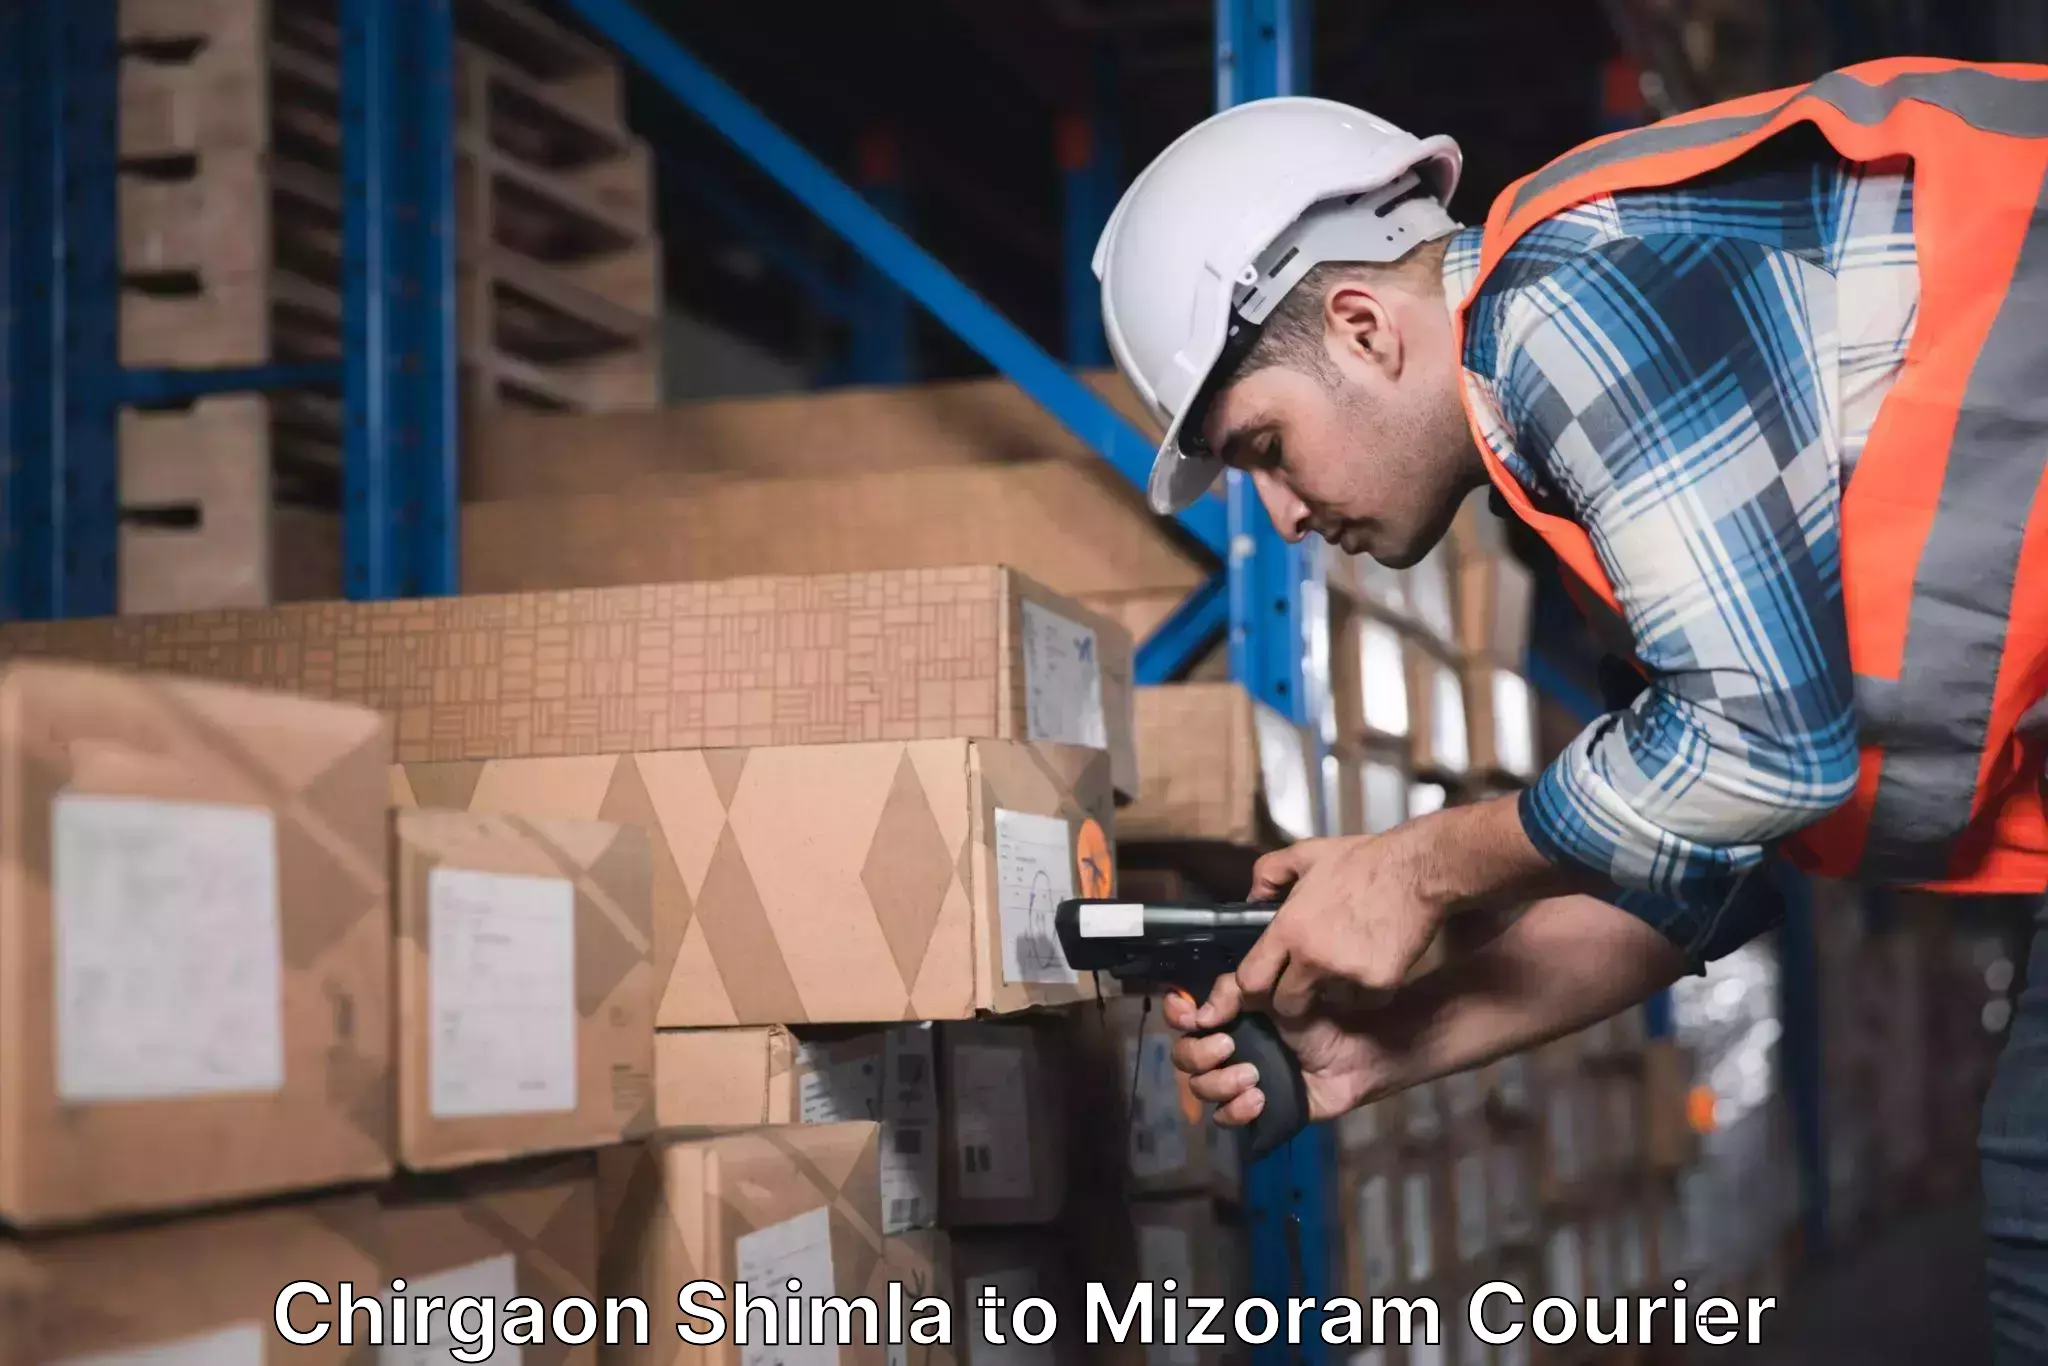 Easy access courier services Chirgaon Shimla to Mizoram